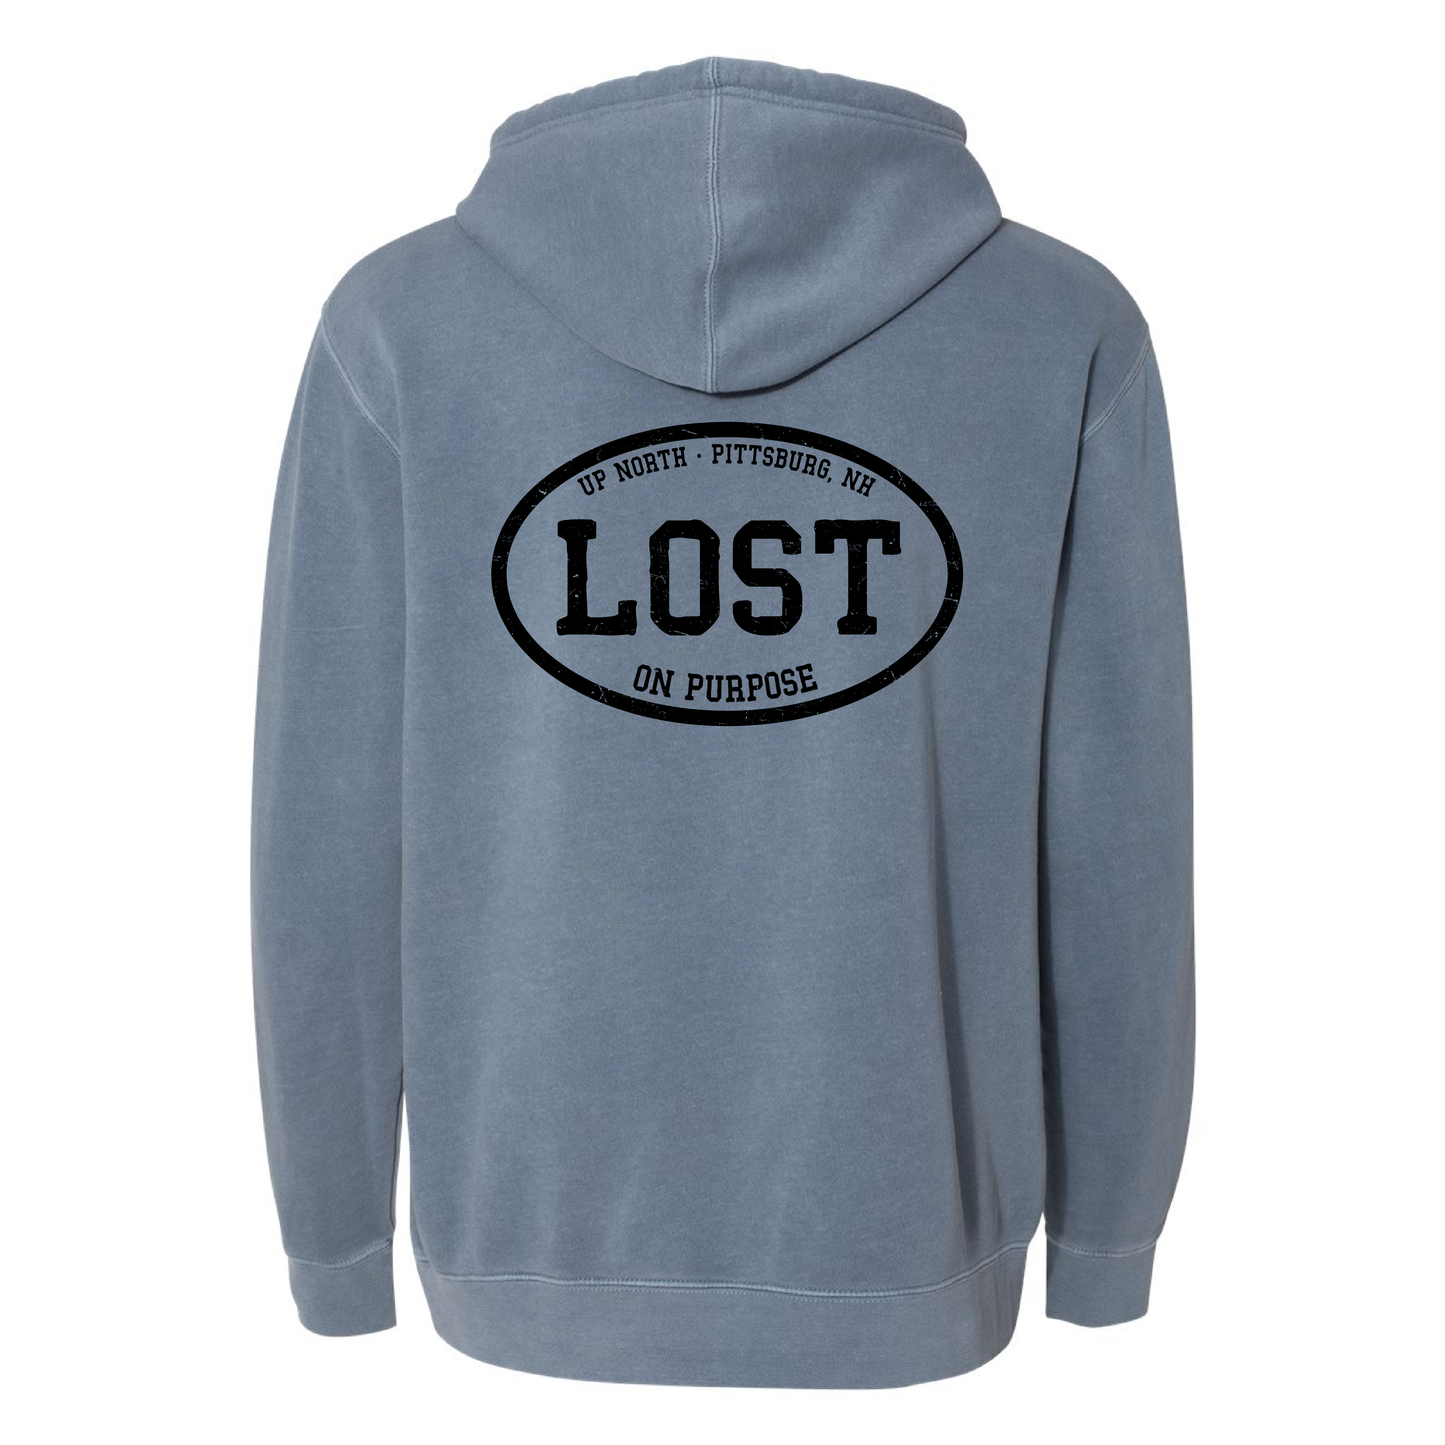 Lost on Purpose - Pigment Dyed Hoodie - Washed Blue